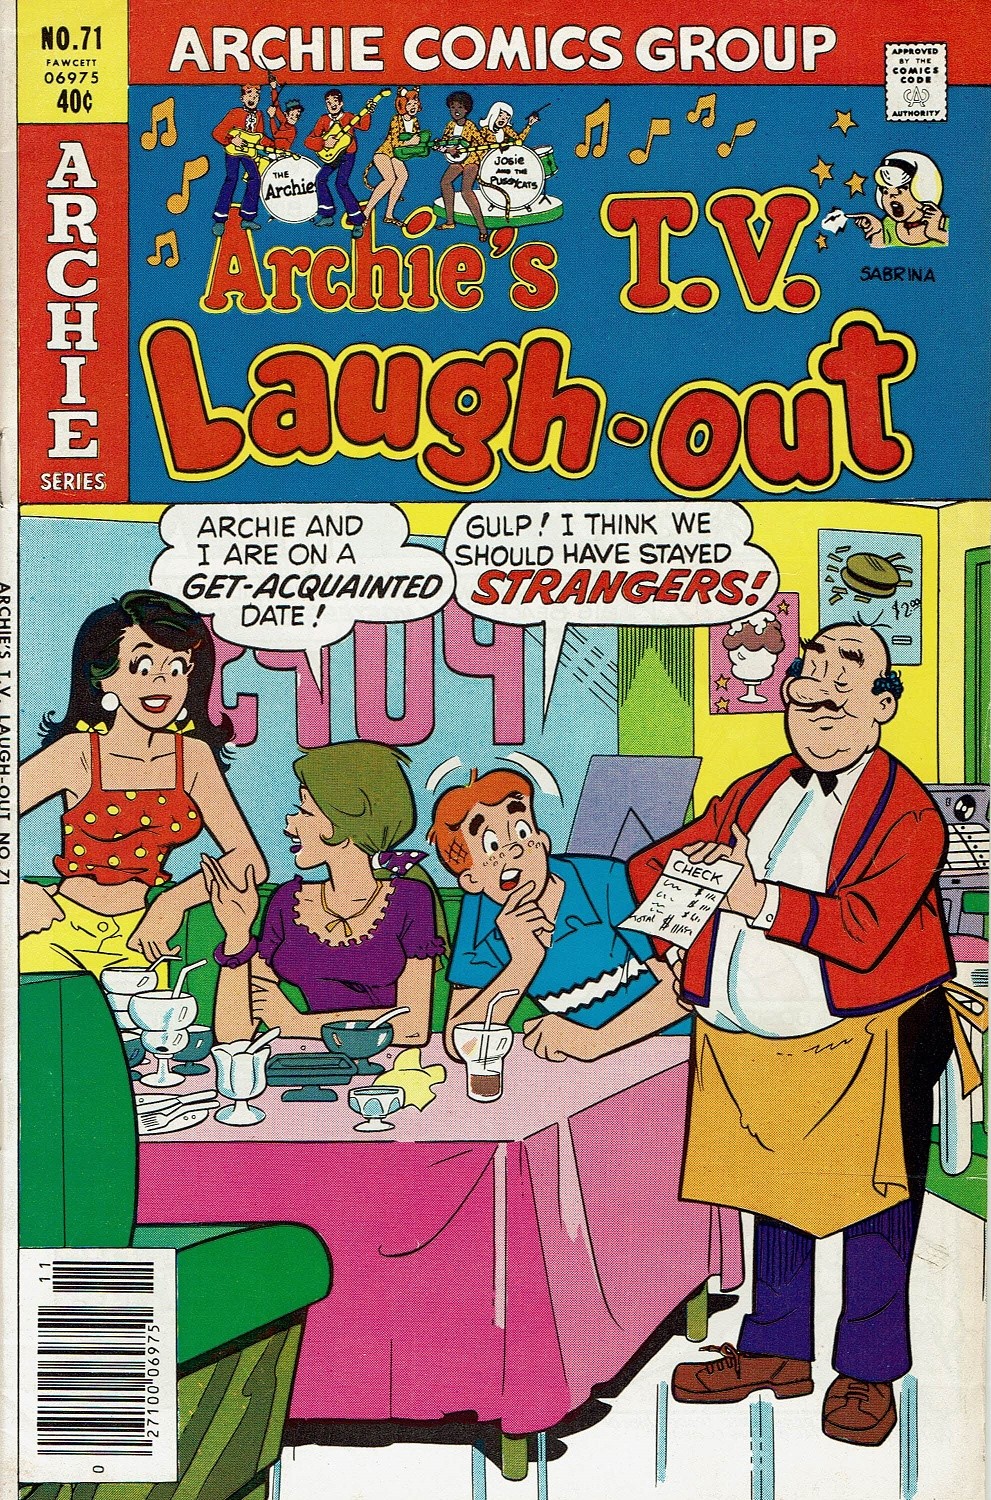 Read online Archie's TV Laugh-Out comic -  Issue #71 - 1